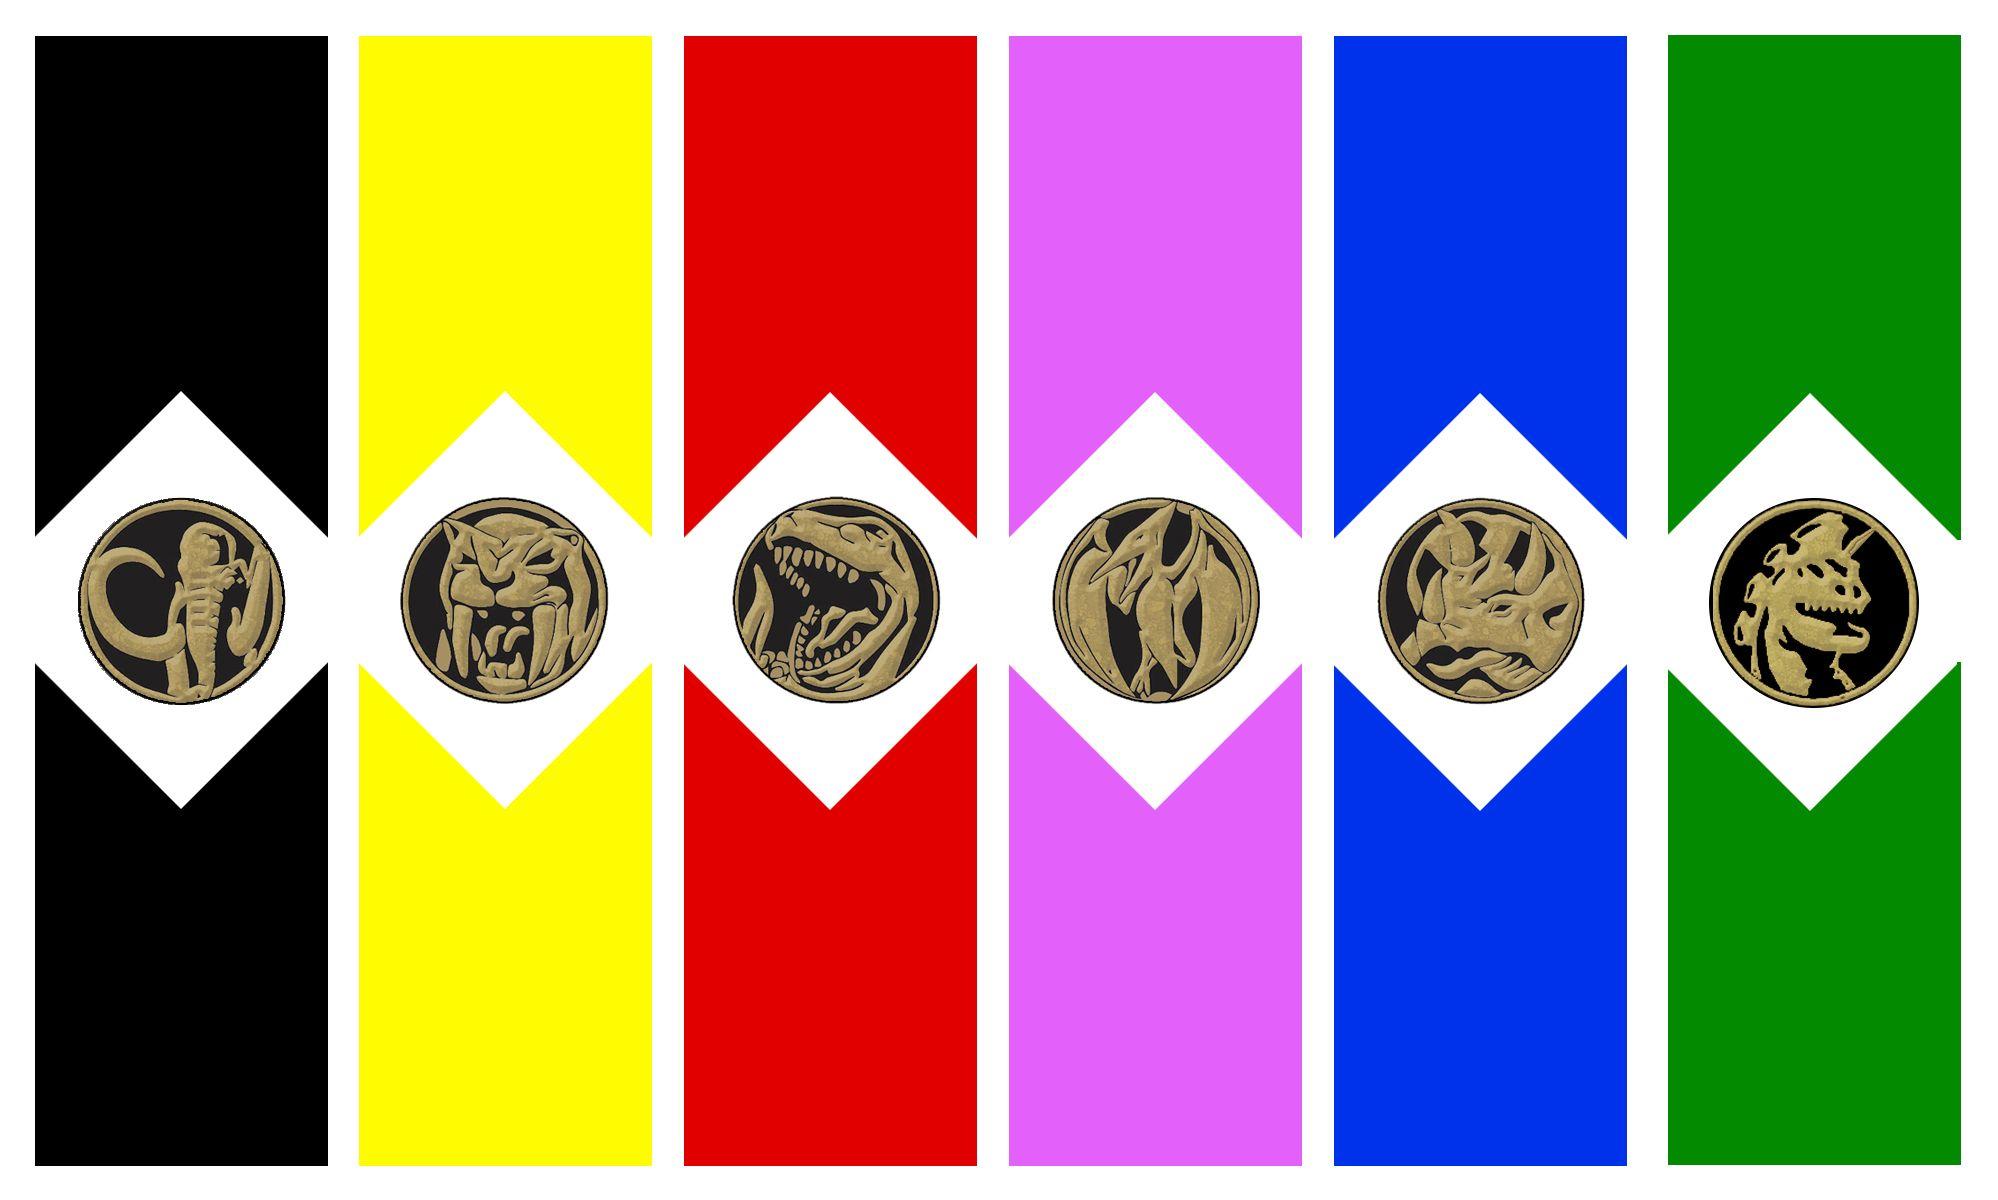 Power rangers coins wallpapers